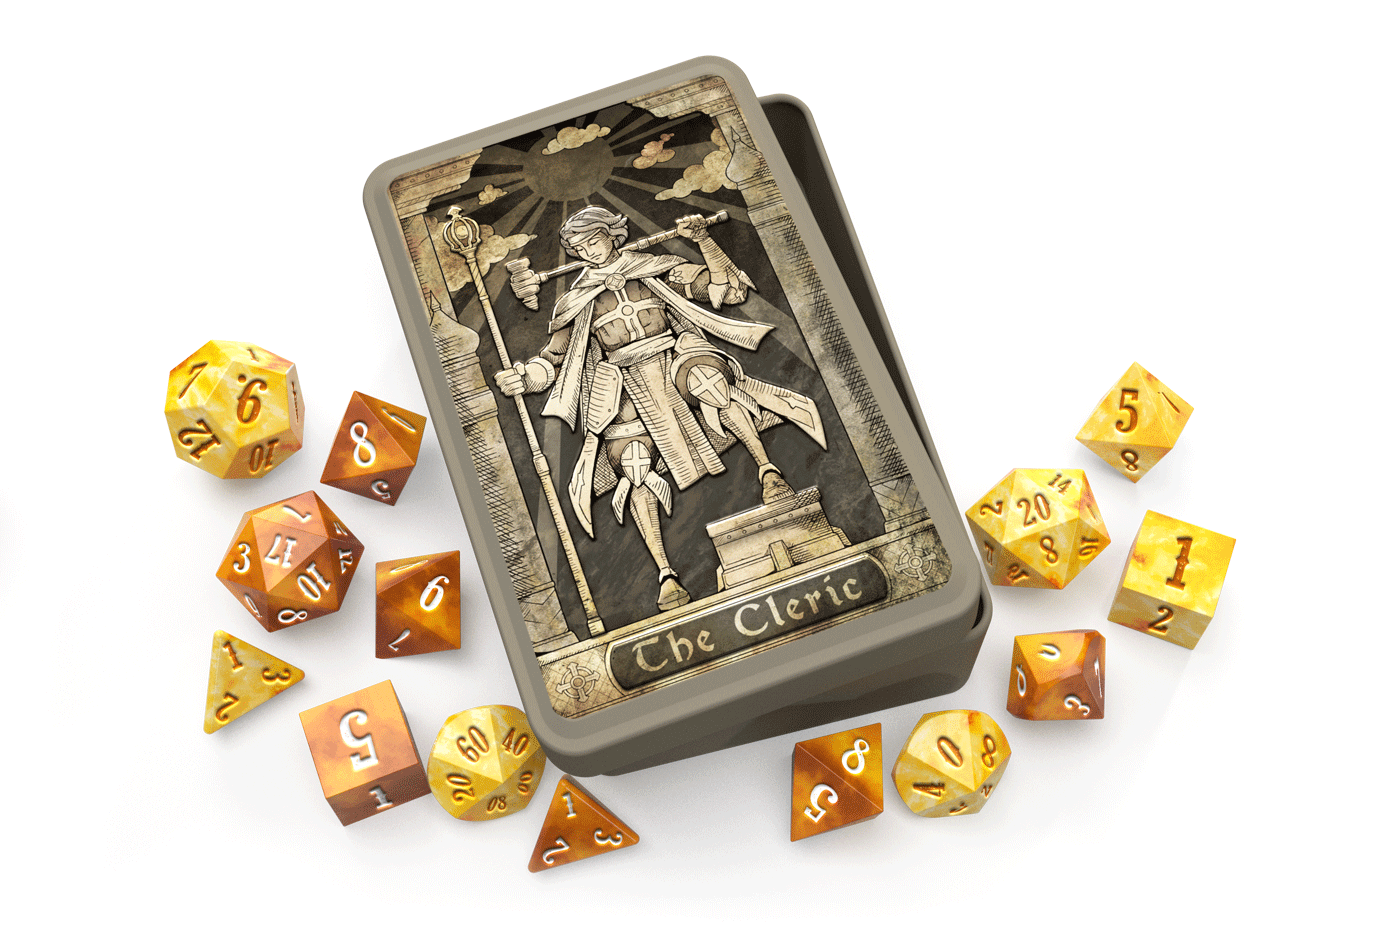 Beadle and Grimm's Cleric Dice Tin. An armored cleric stands on top of a chest with a hammer over their shoulder and a staff in their other hand. The tin is surrounded by orange and yellow dice